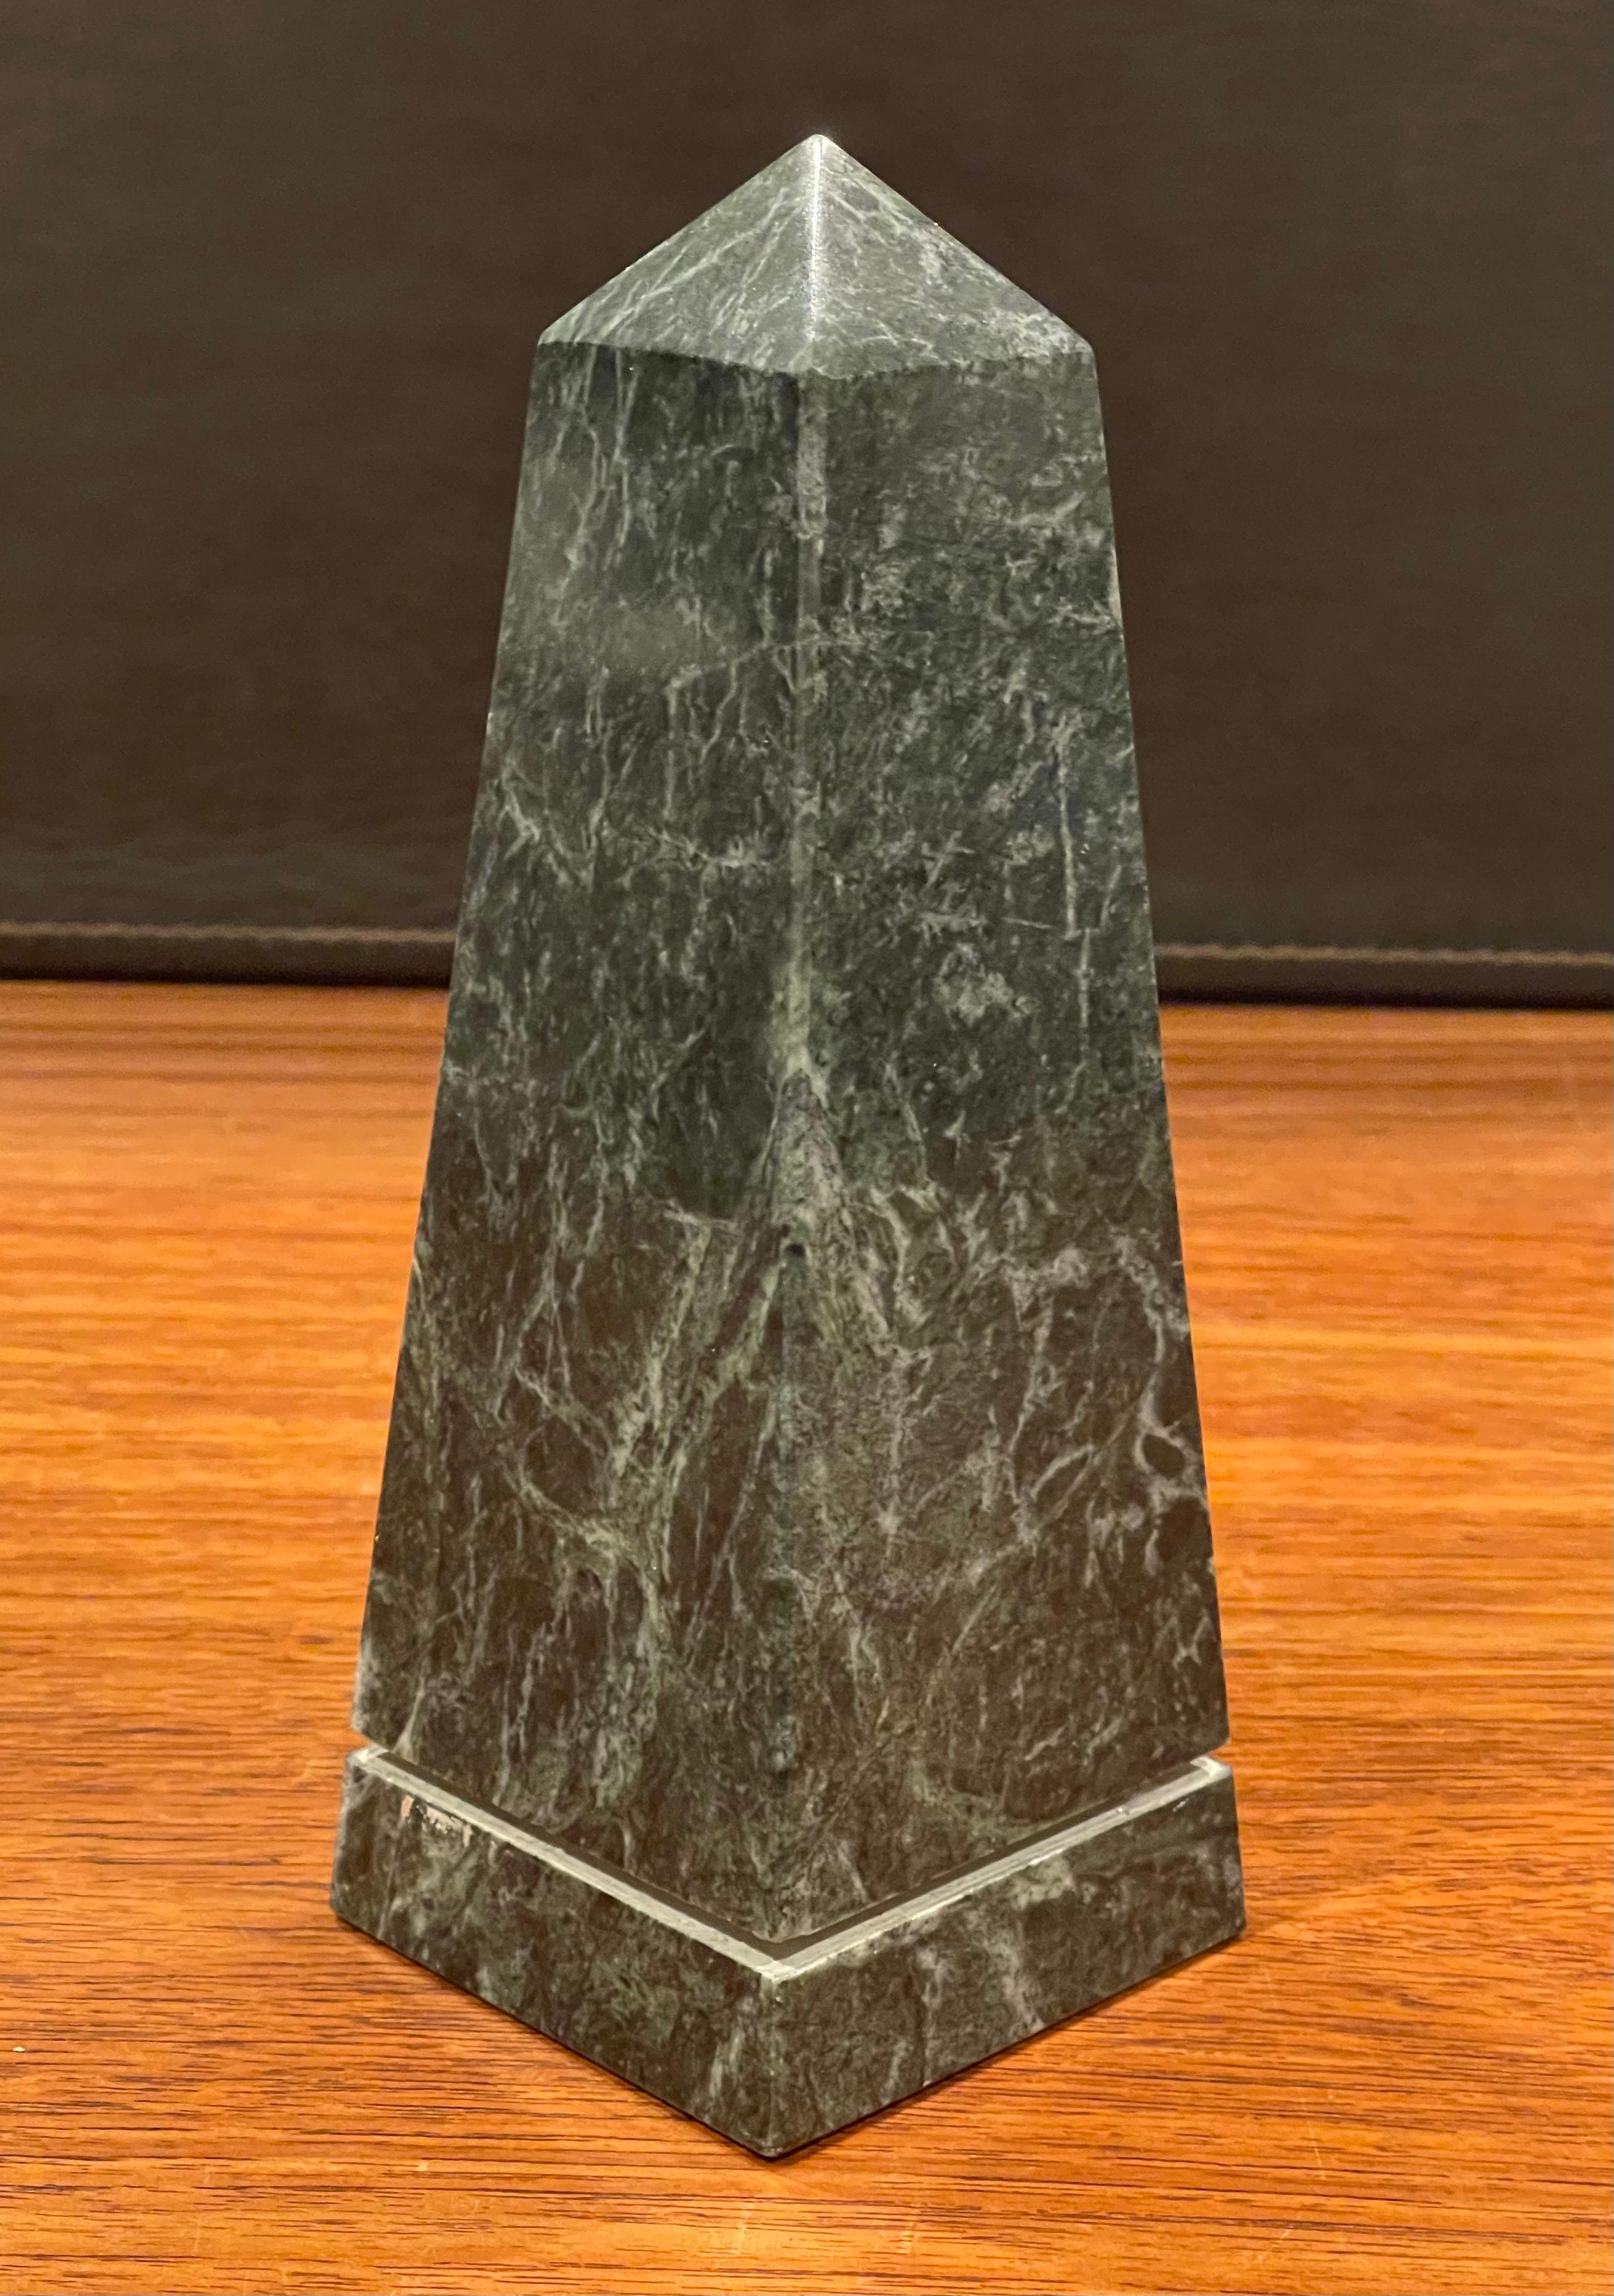 Beautiful solid green marble decorative obelisk, circa 1970s. The piece is in very good vintage condition with no chips or cracks and is nicely polished. The piece is 2.75